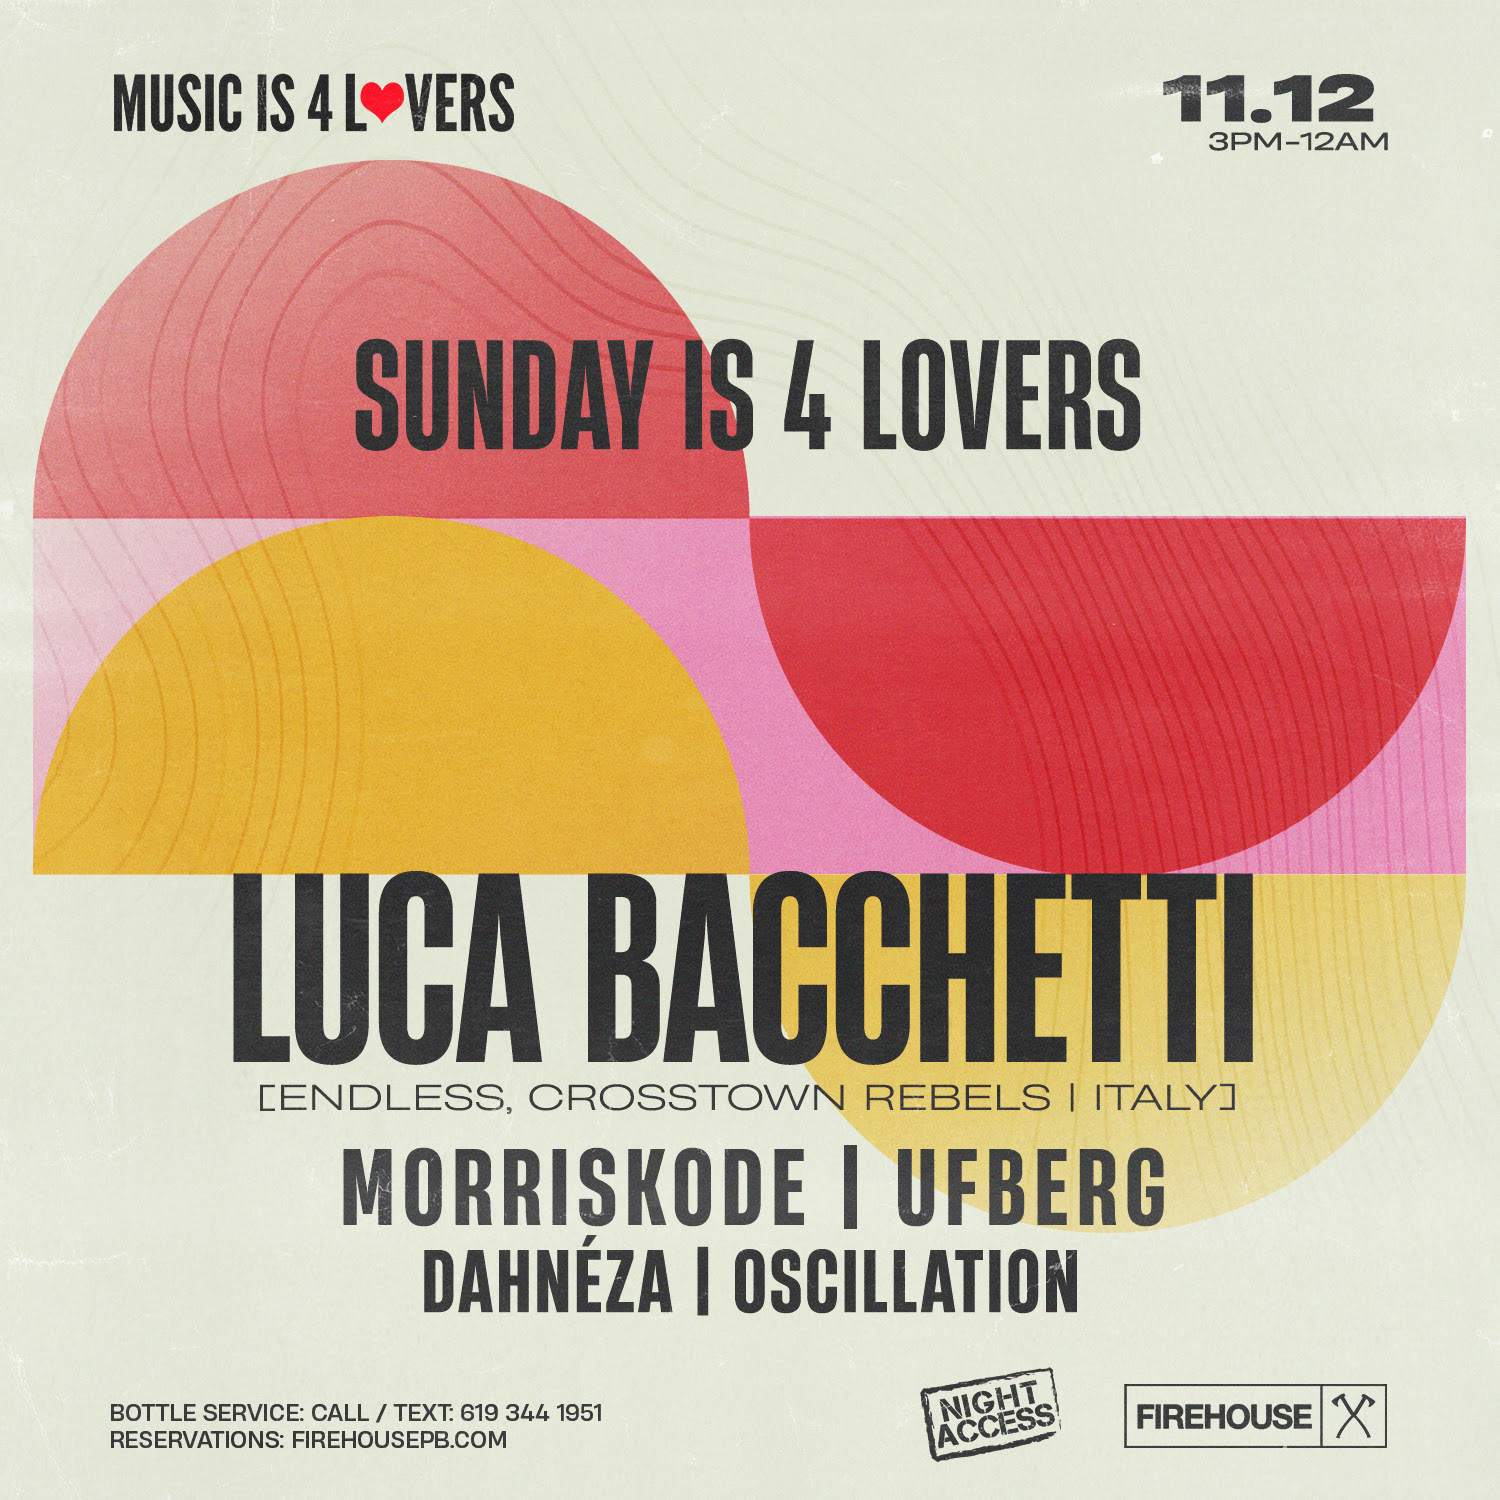 Luca Bacchetti [Endless, Crosstown Rebels - Italy] at Firehouse - NO COVER - フライヤー表